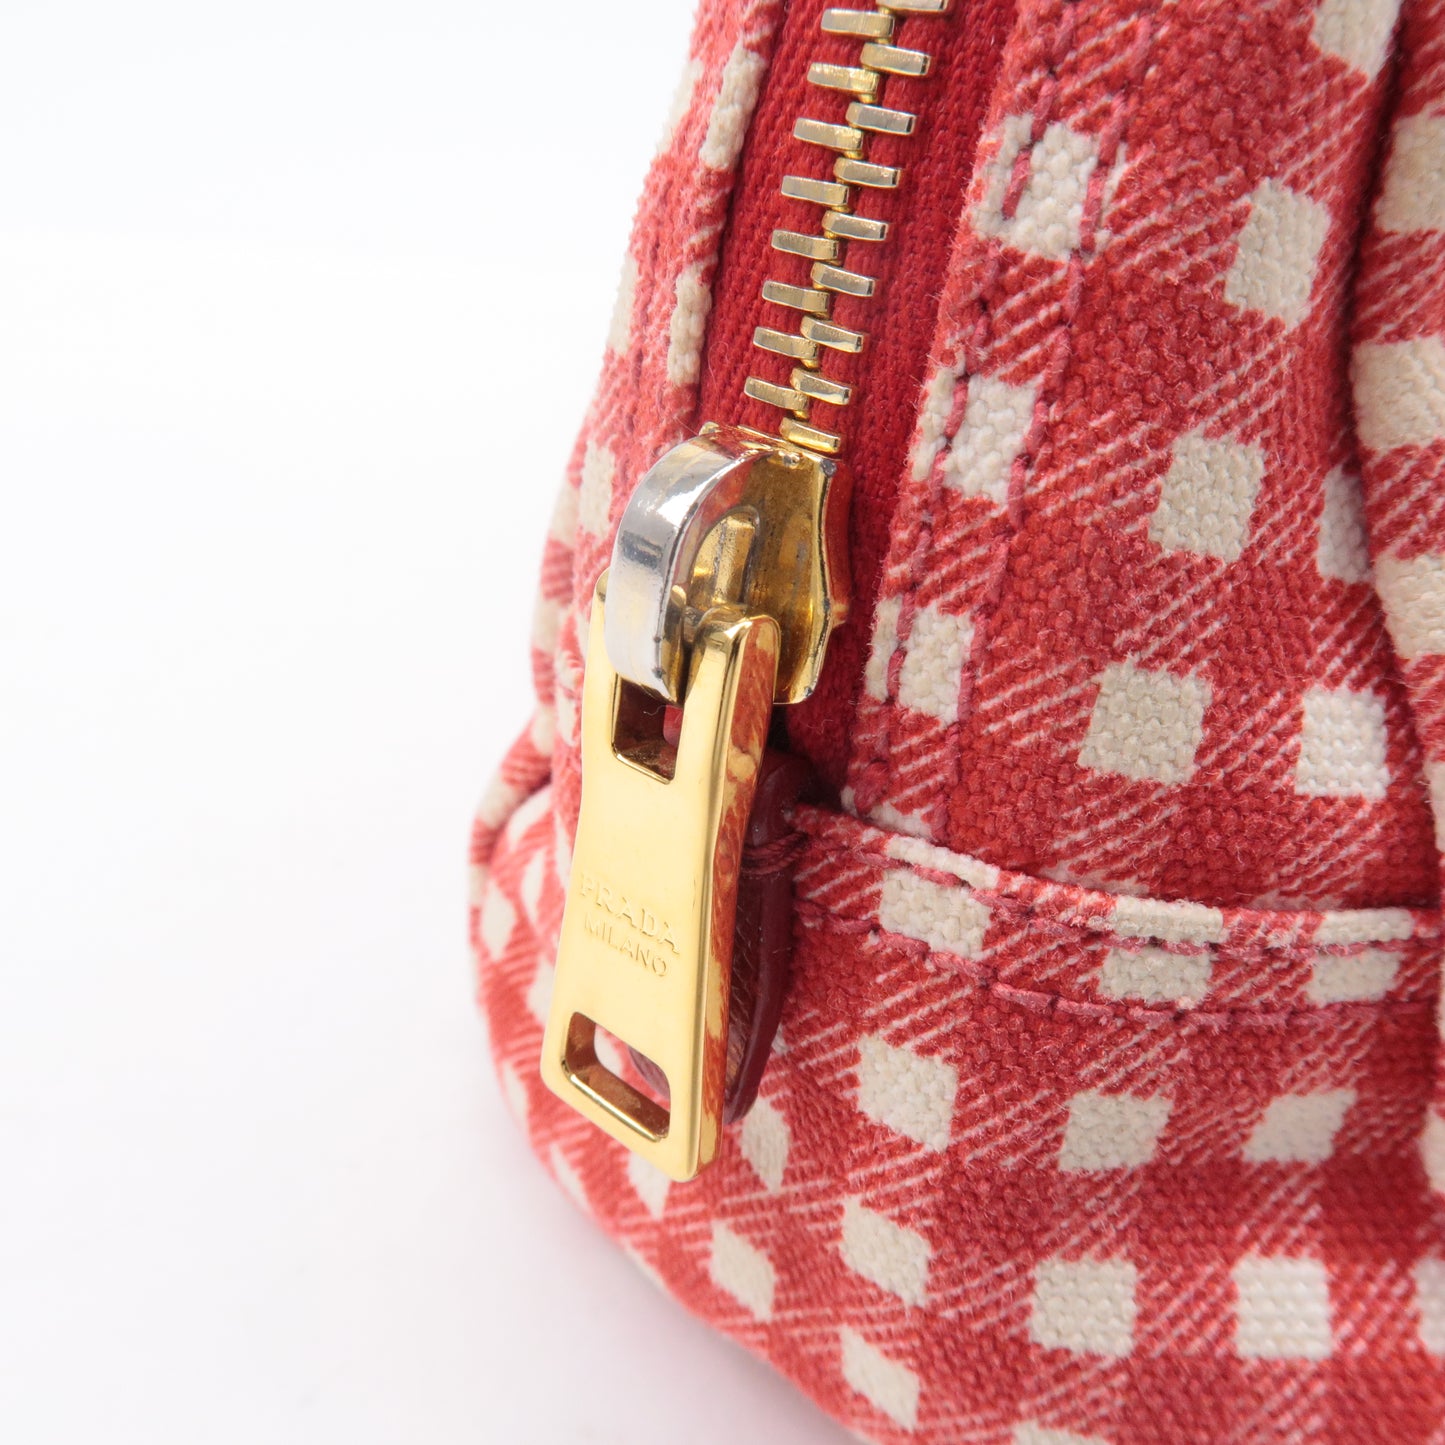 PRADA Logo Canvas Leather Checkered Pouch Red 1NA693